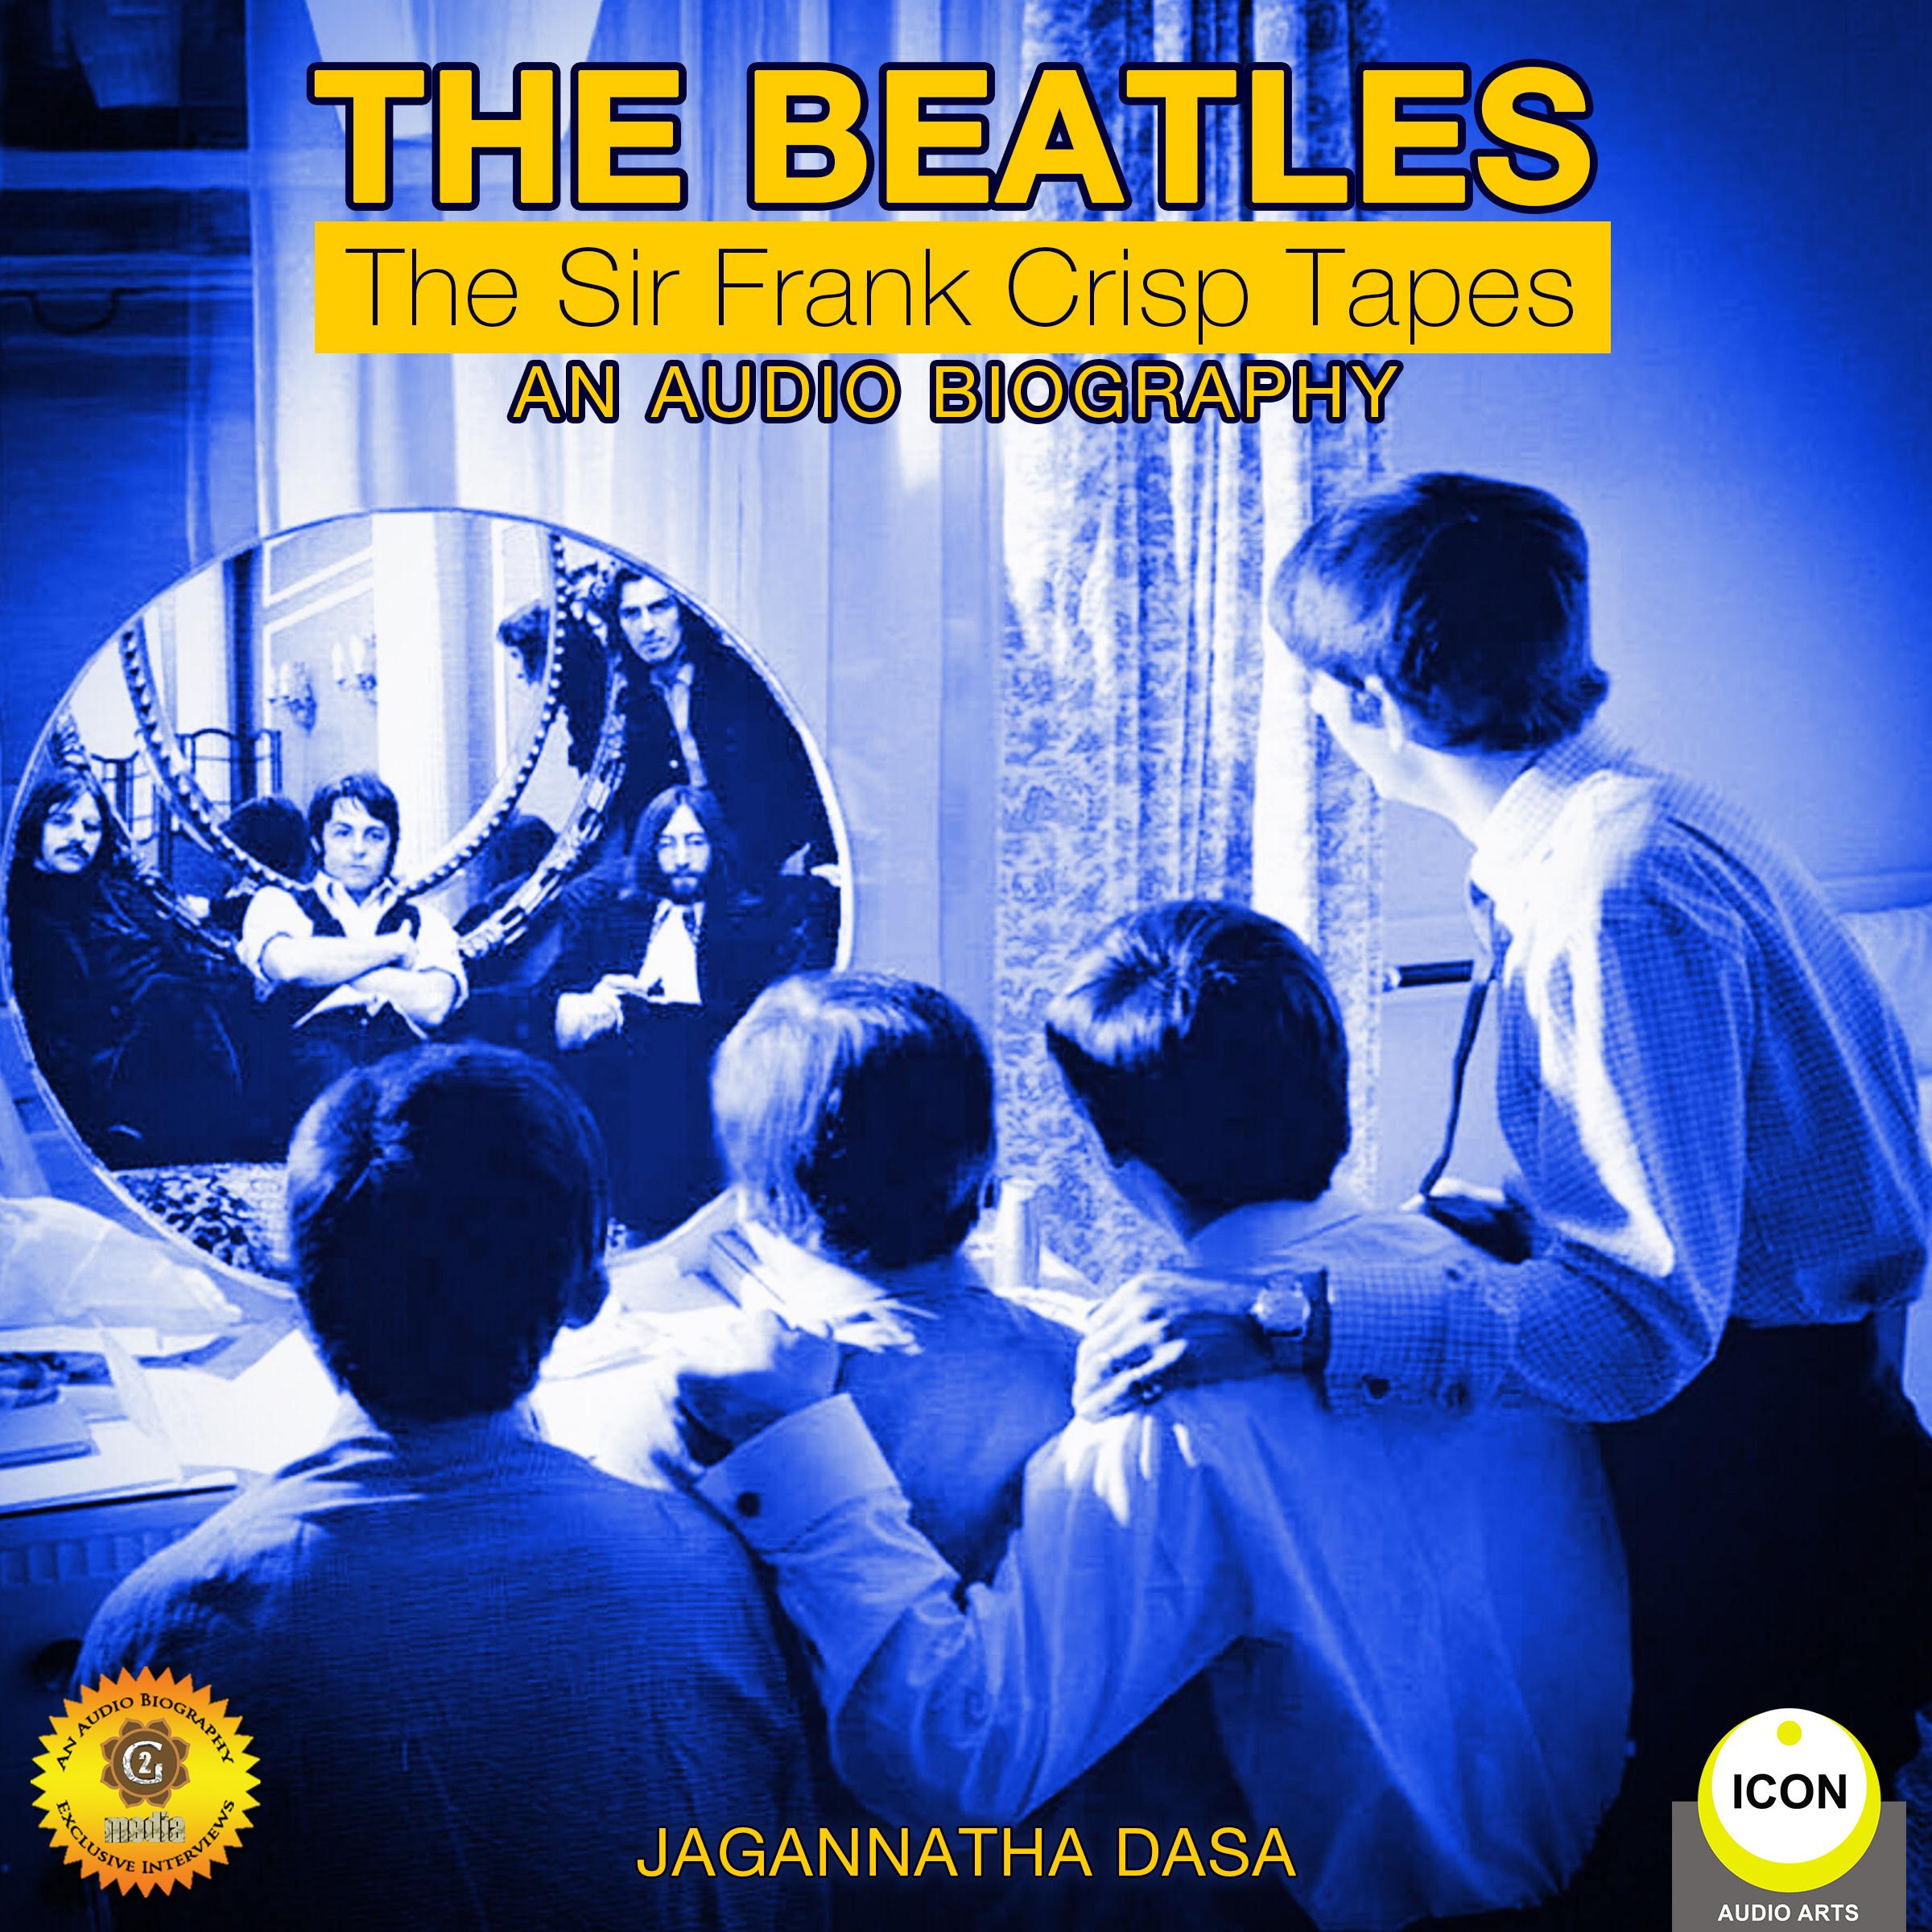 The Beatles - The Sir Frank Crisp Tapes - An Audio Biography